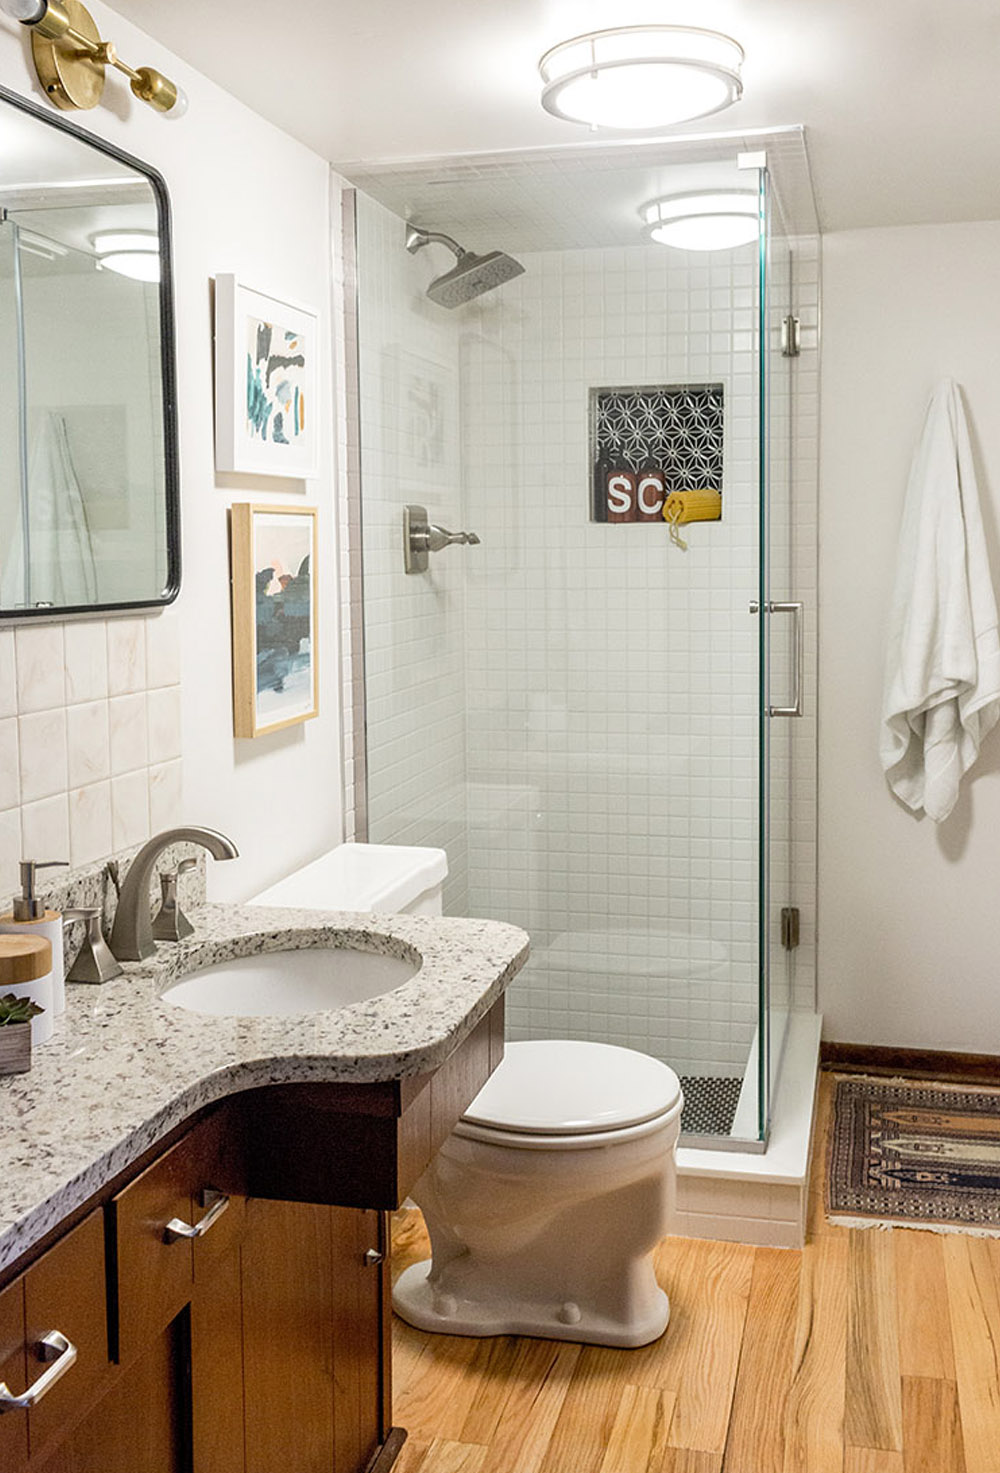 8 Things to Consider During Your Bathroom Renovation